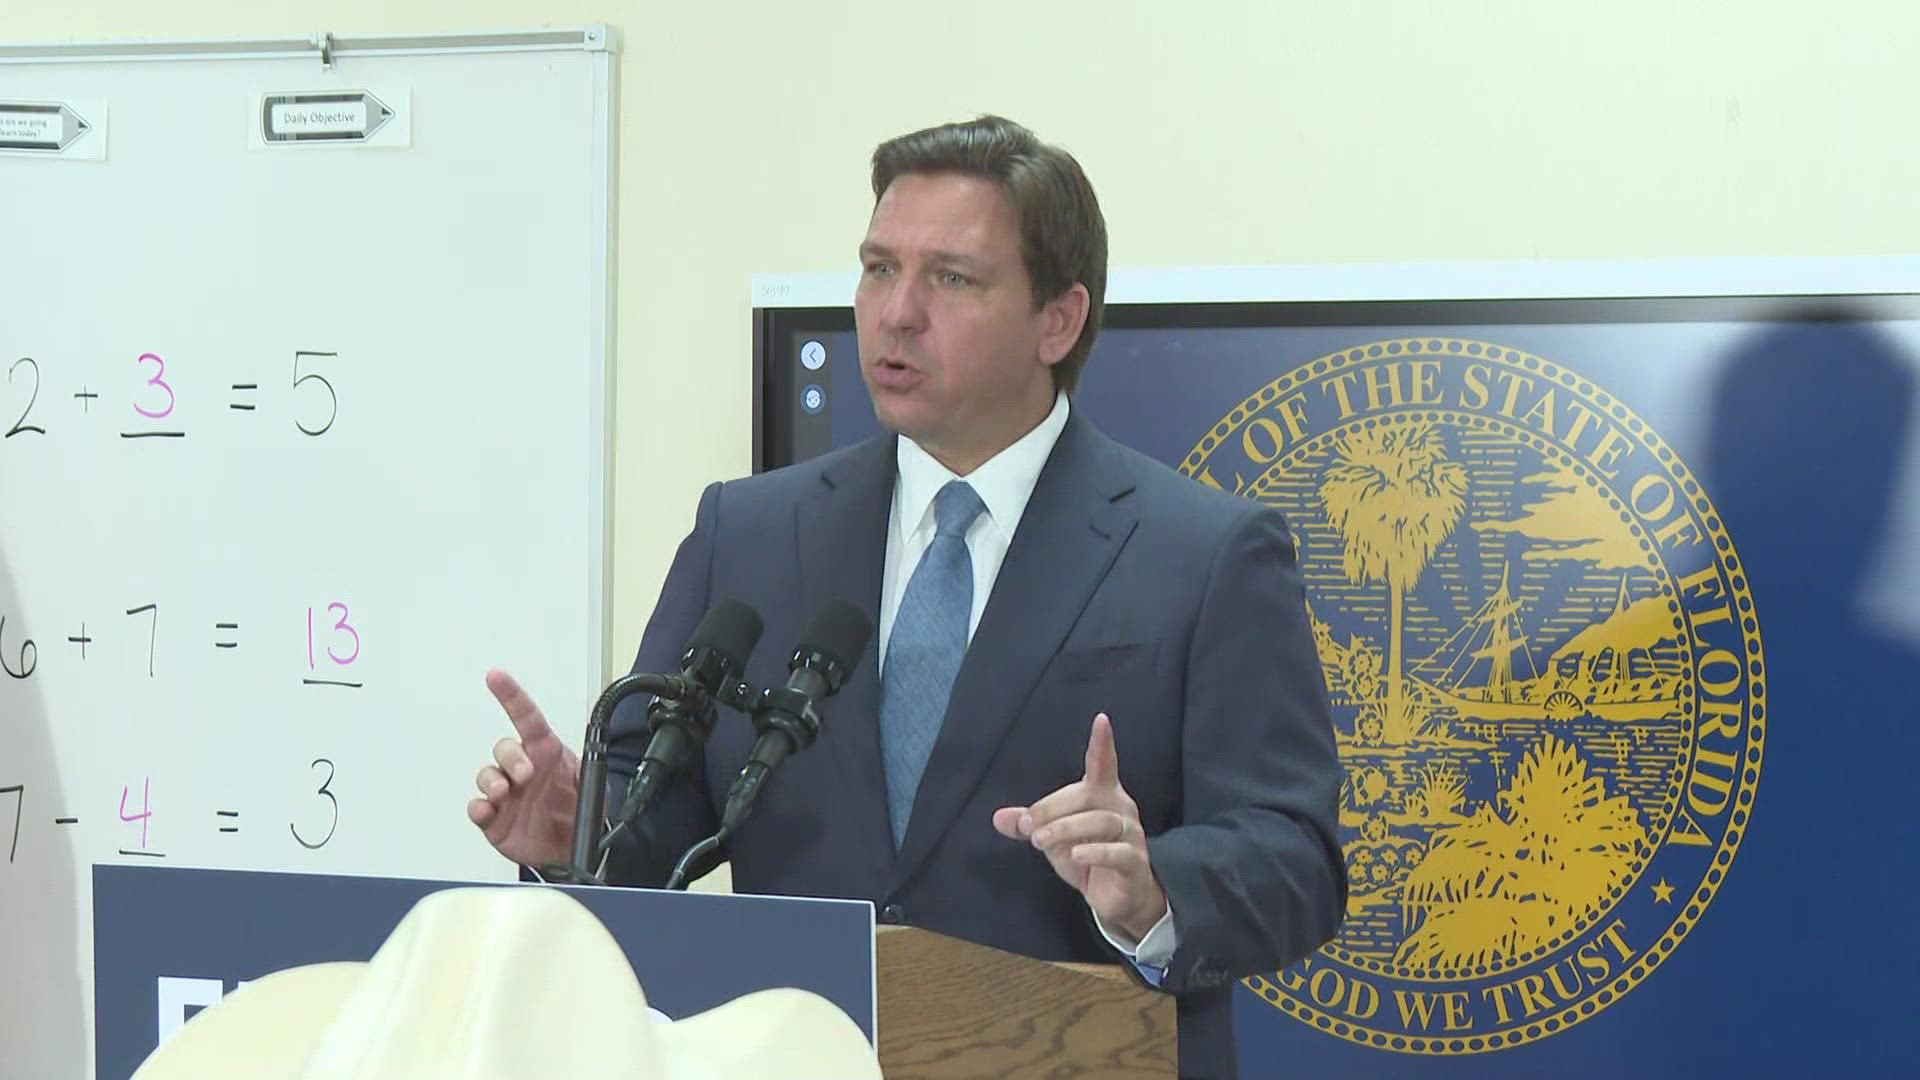 "We want education, not indoctrination," DeSantis said Monday at a Jacksonville school. He said the AP class is using Black history to "shoehorn in queer history."